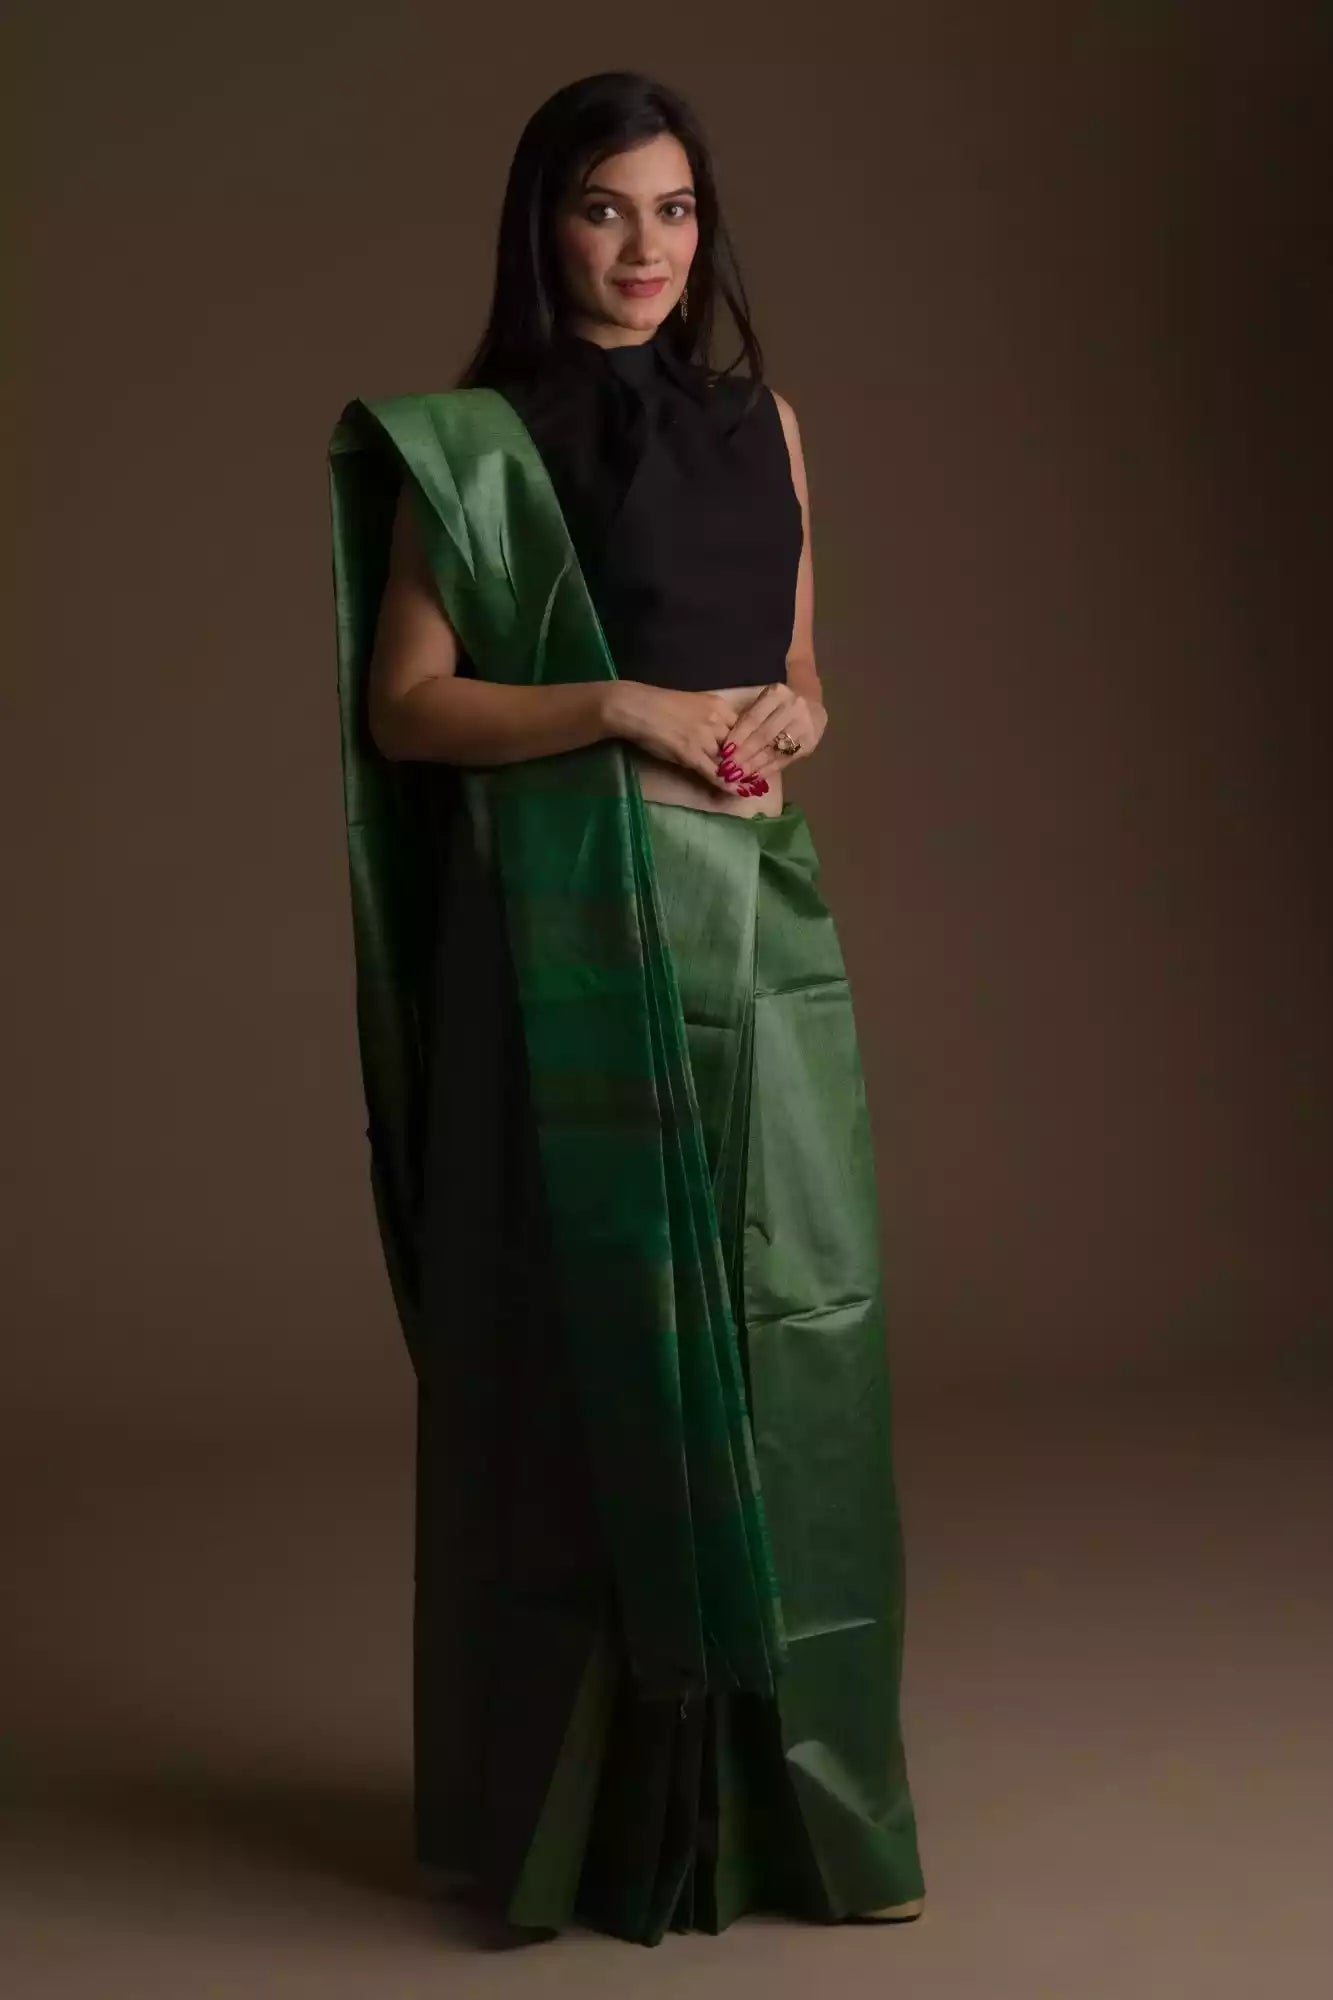 woman in ethnic posing wearing dark green saree with black blouse and heels against a beige background